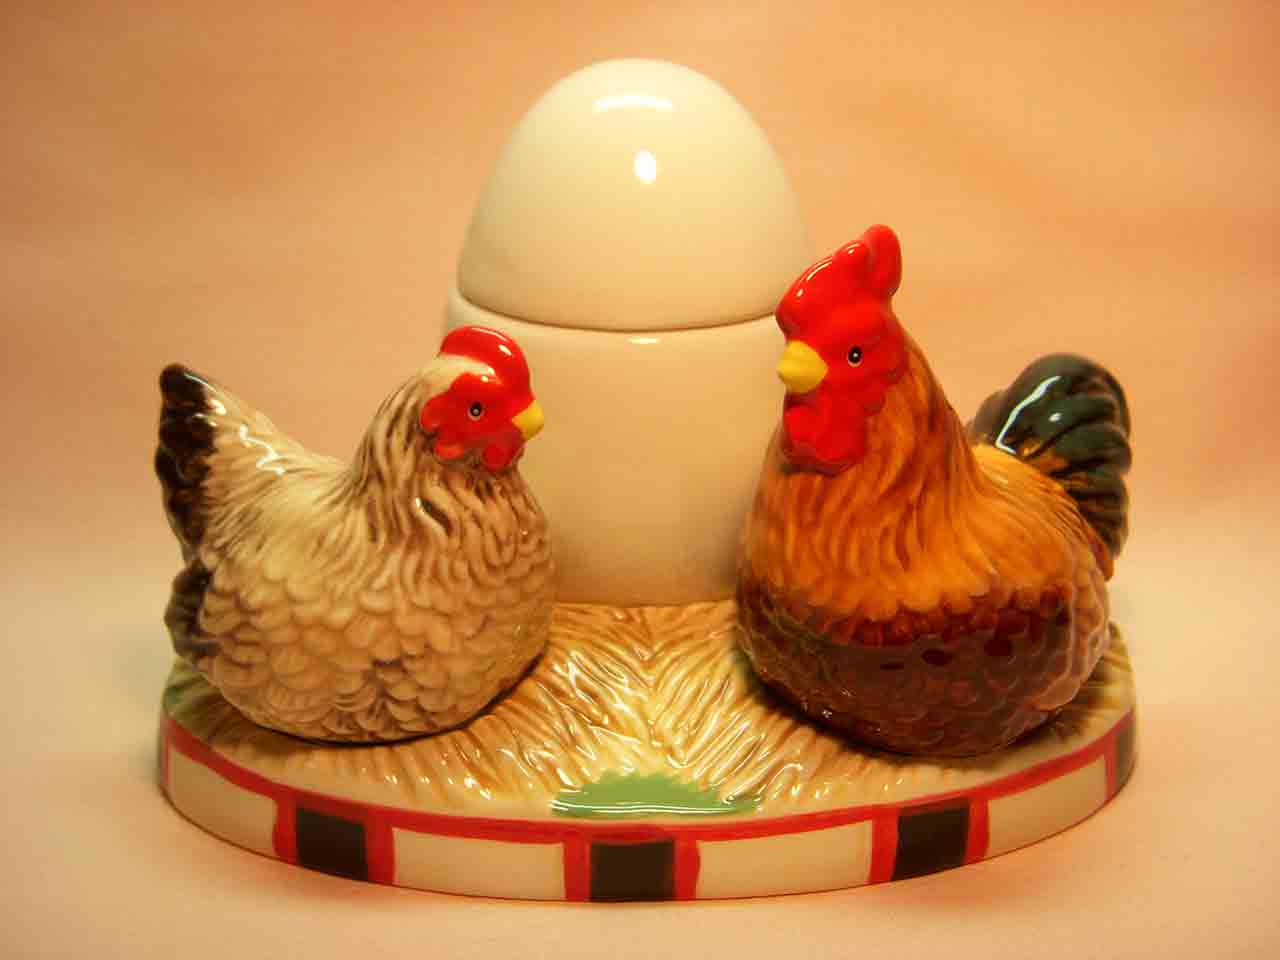 Chickens with egg Mwah Westland Giftware salt and pepper shakers